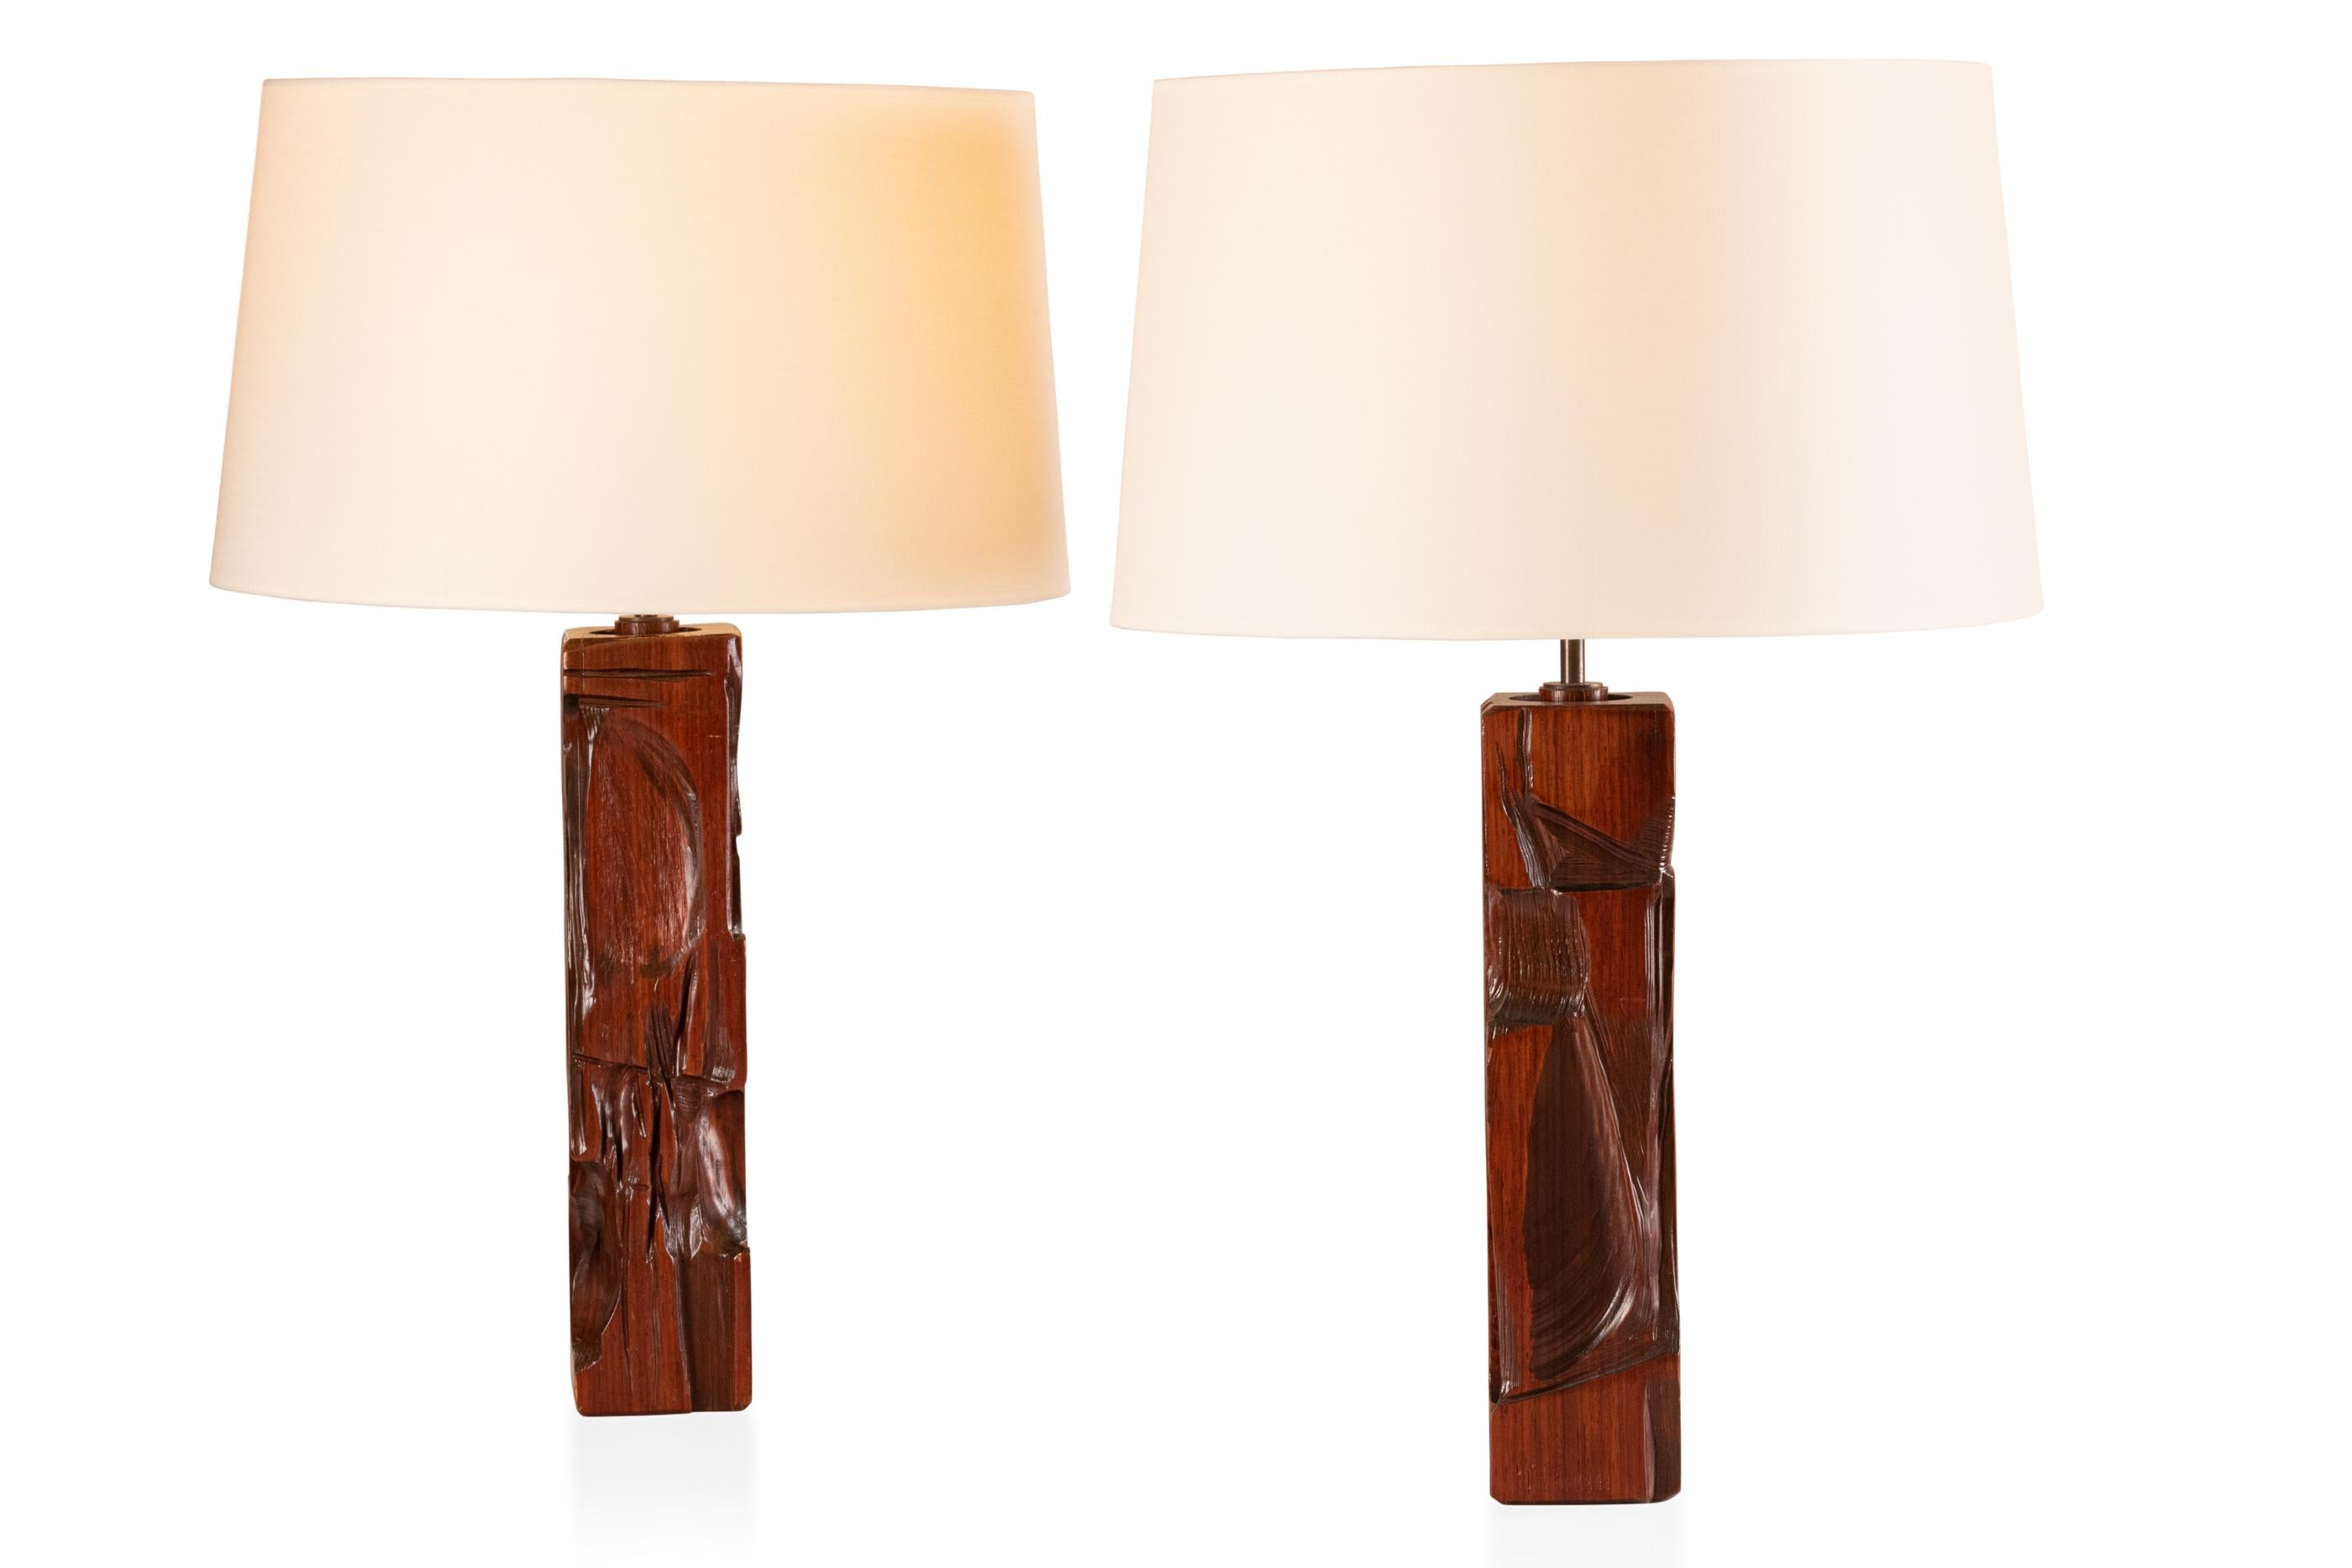 Pair of carved wood table lamps.
Varnished walnut.
Design Gianni Pinna.
signed.
Italy, 1970

Measures: Height total : 70 cm - 27.5 in.
Diameter shade : 45 cm - 17.7 in.
Height foot 1 : 39,5 cm - 15.5 in.
Height food 2 : 41 cm - 16.1